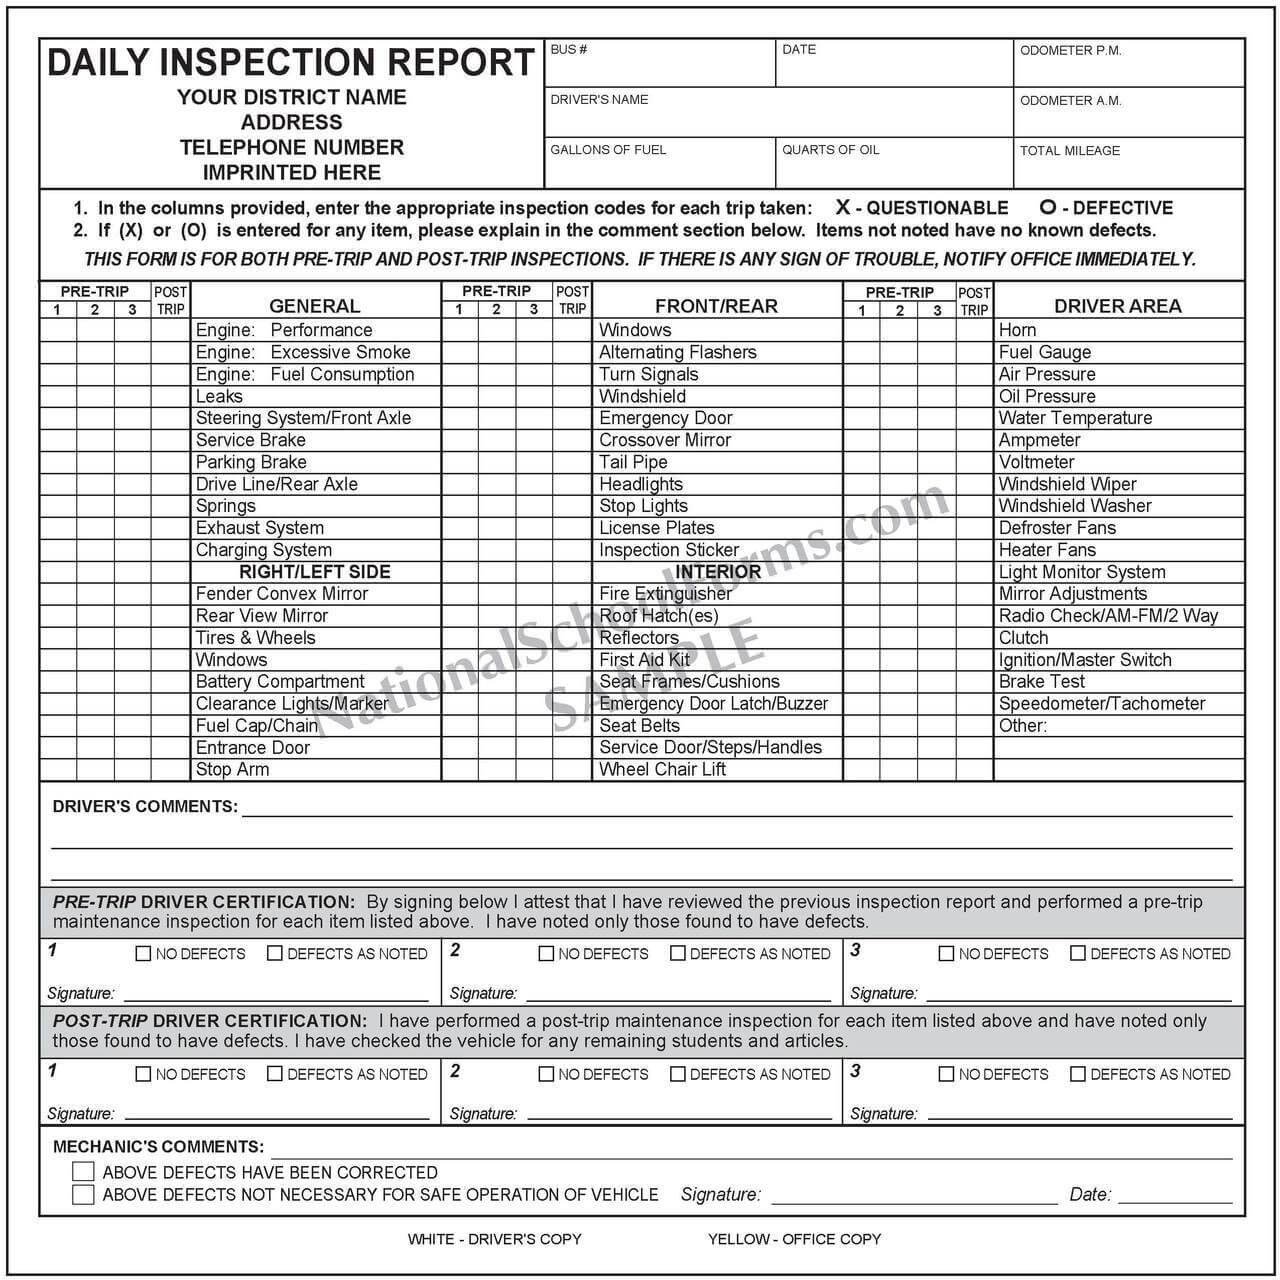 Daily Inspection Report With Pre And Post Trip | Safety Regarding Daily Inspection Report Template